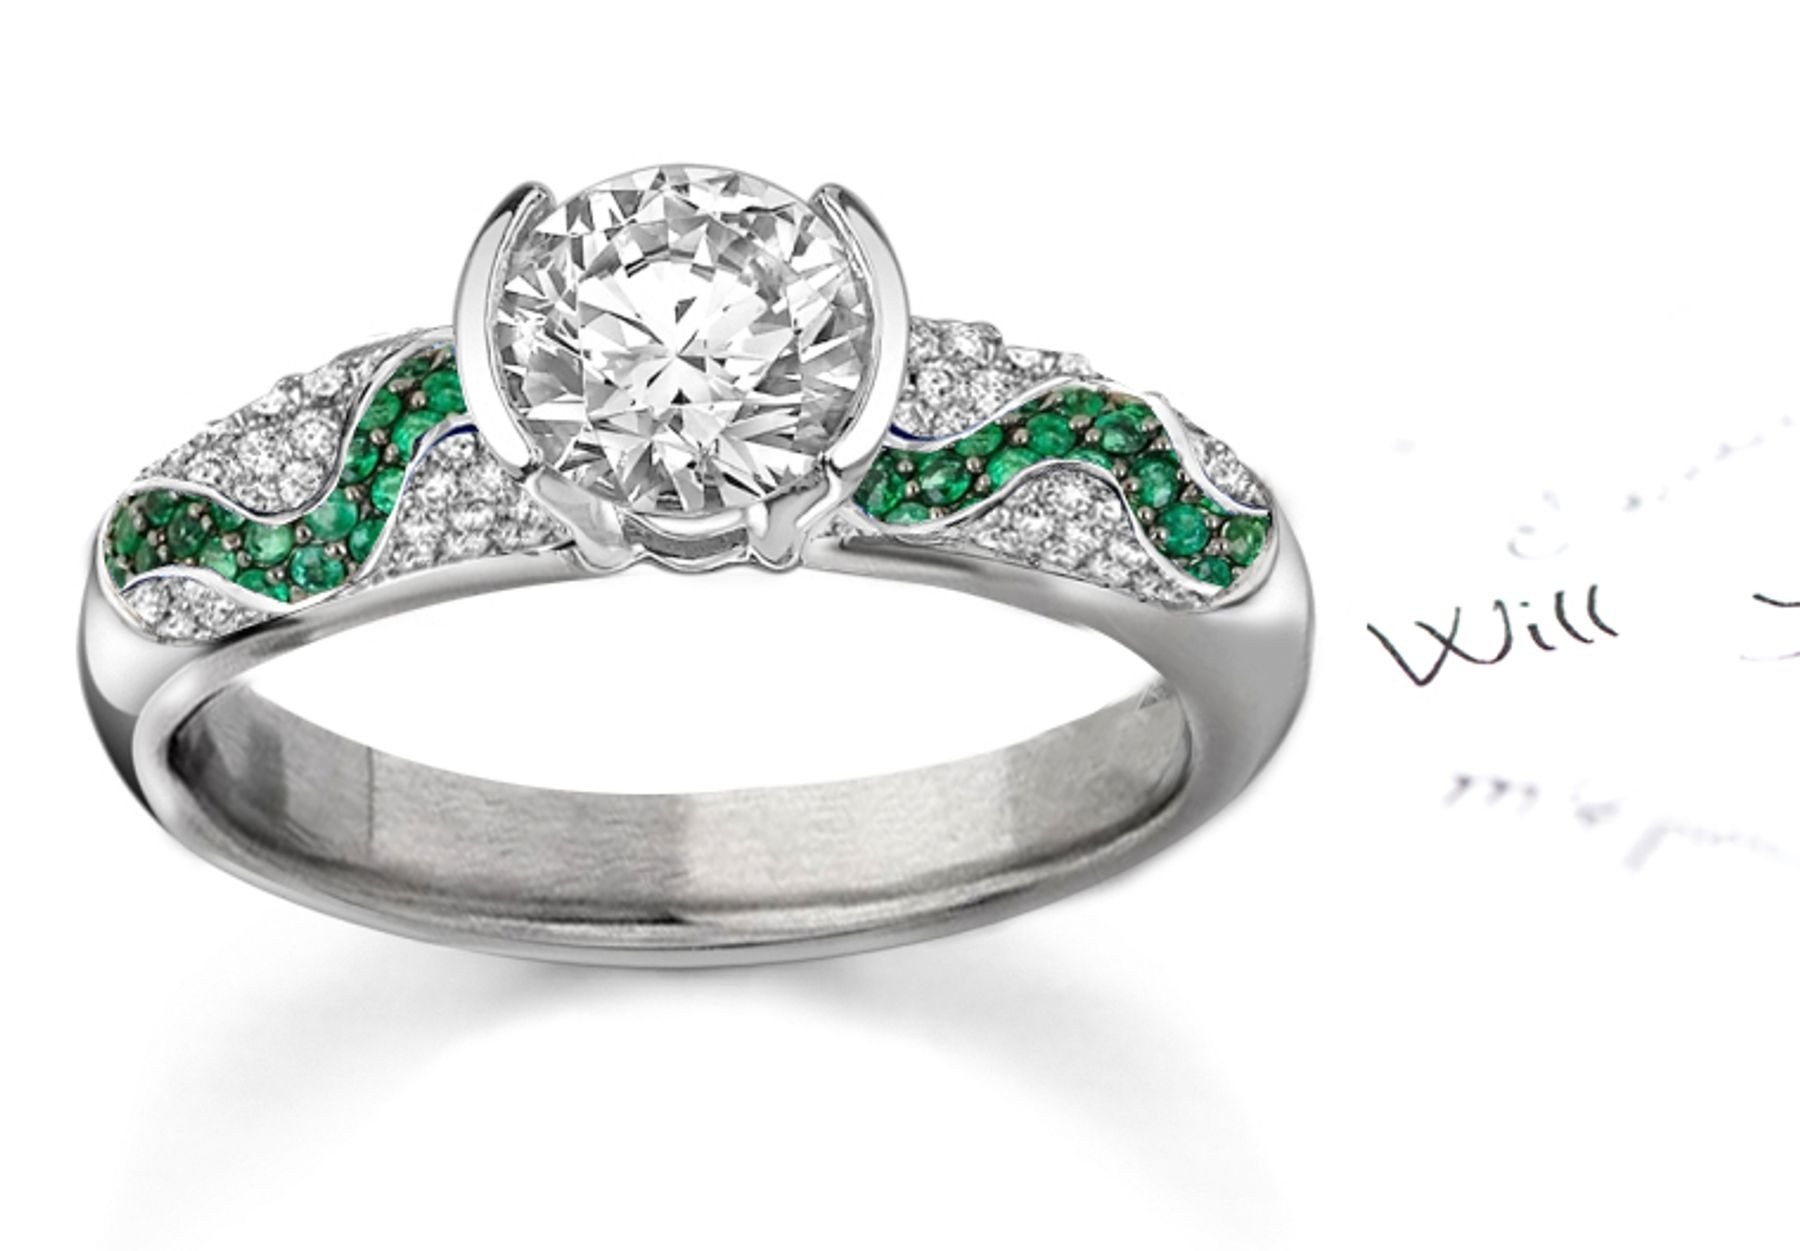 LATEST FRENCH STYLES:Diamond & French MicropaveEmerald Wave Ring in Gold